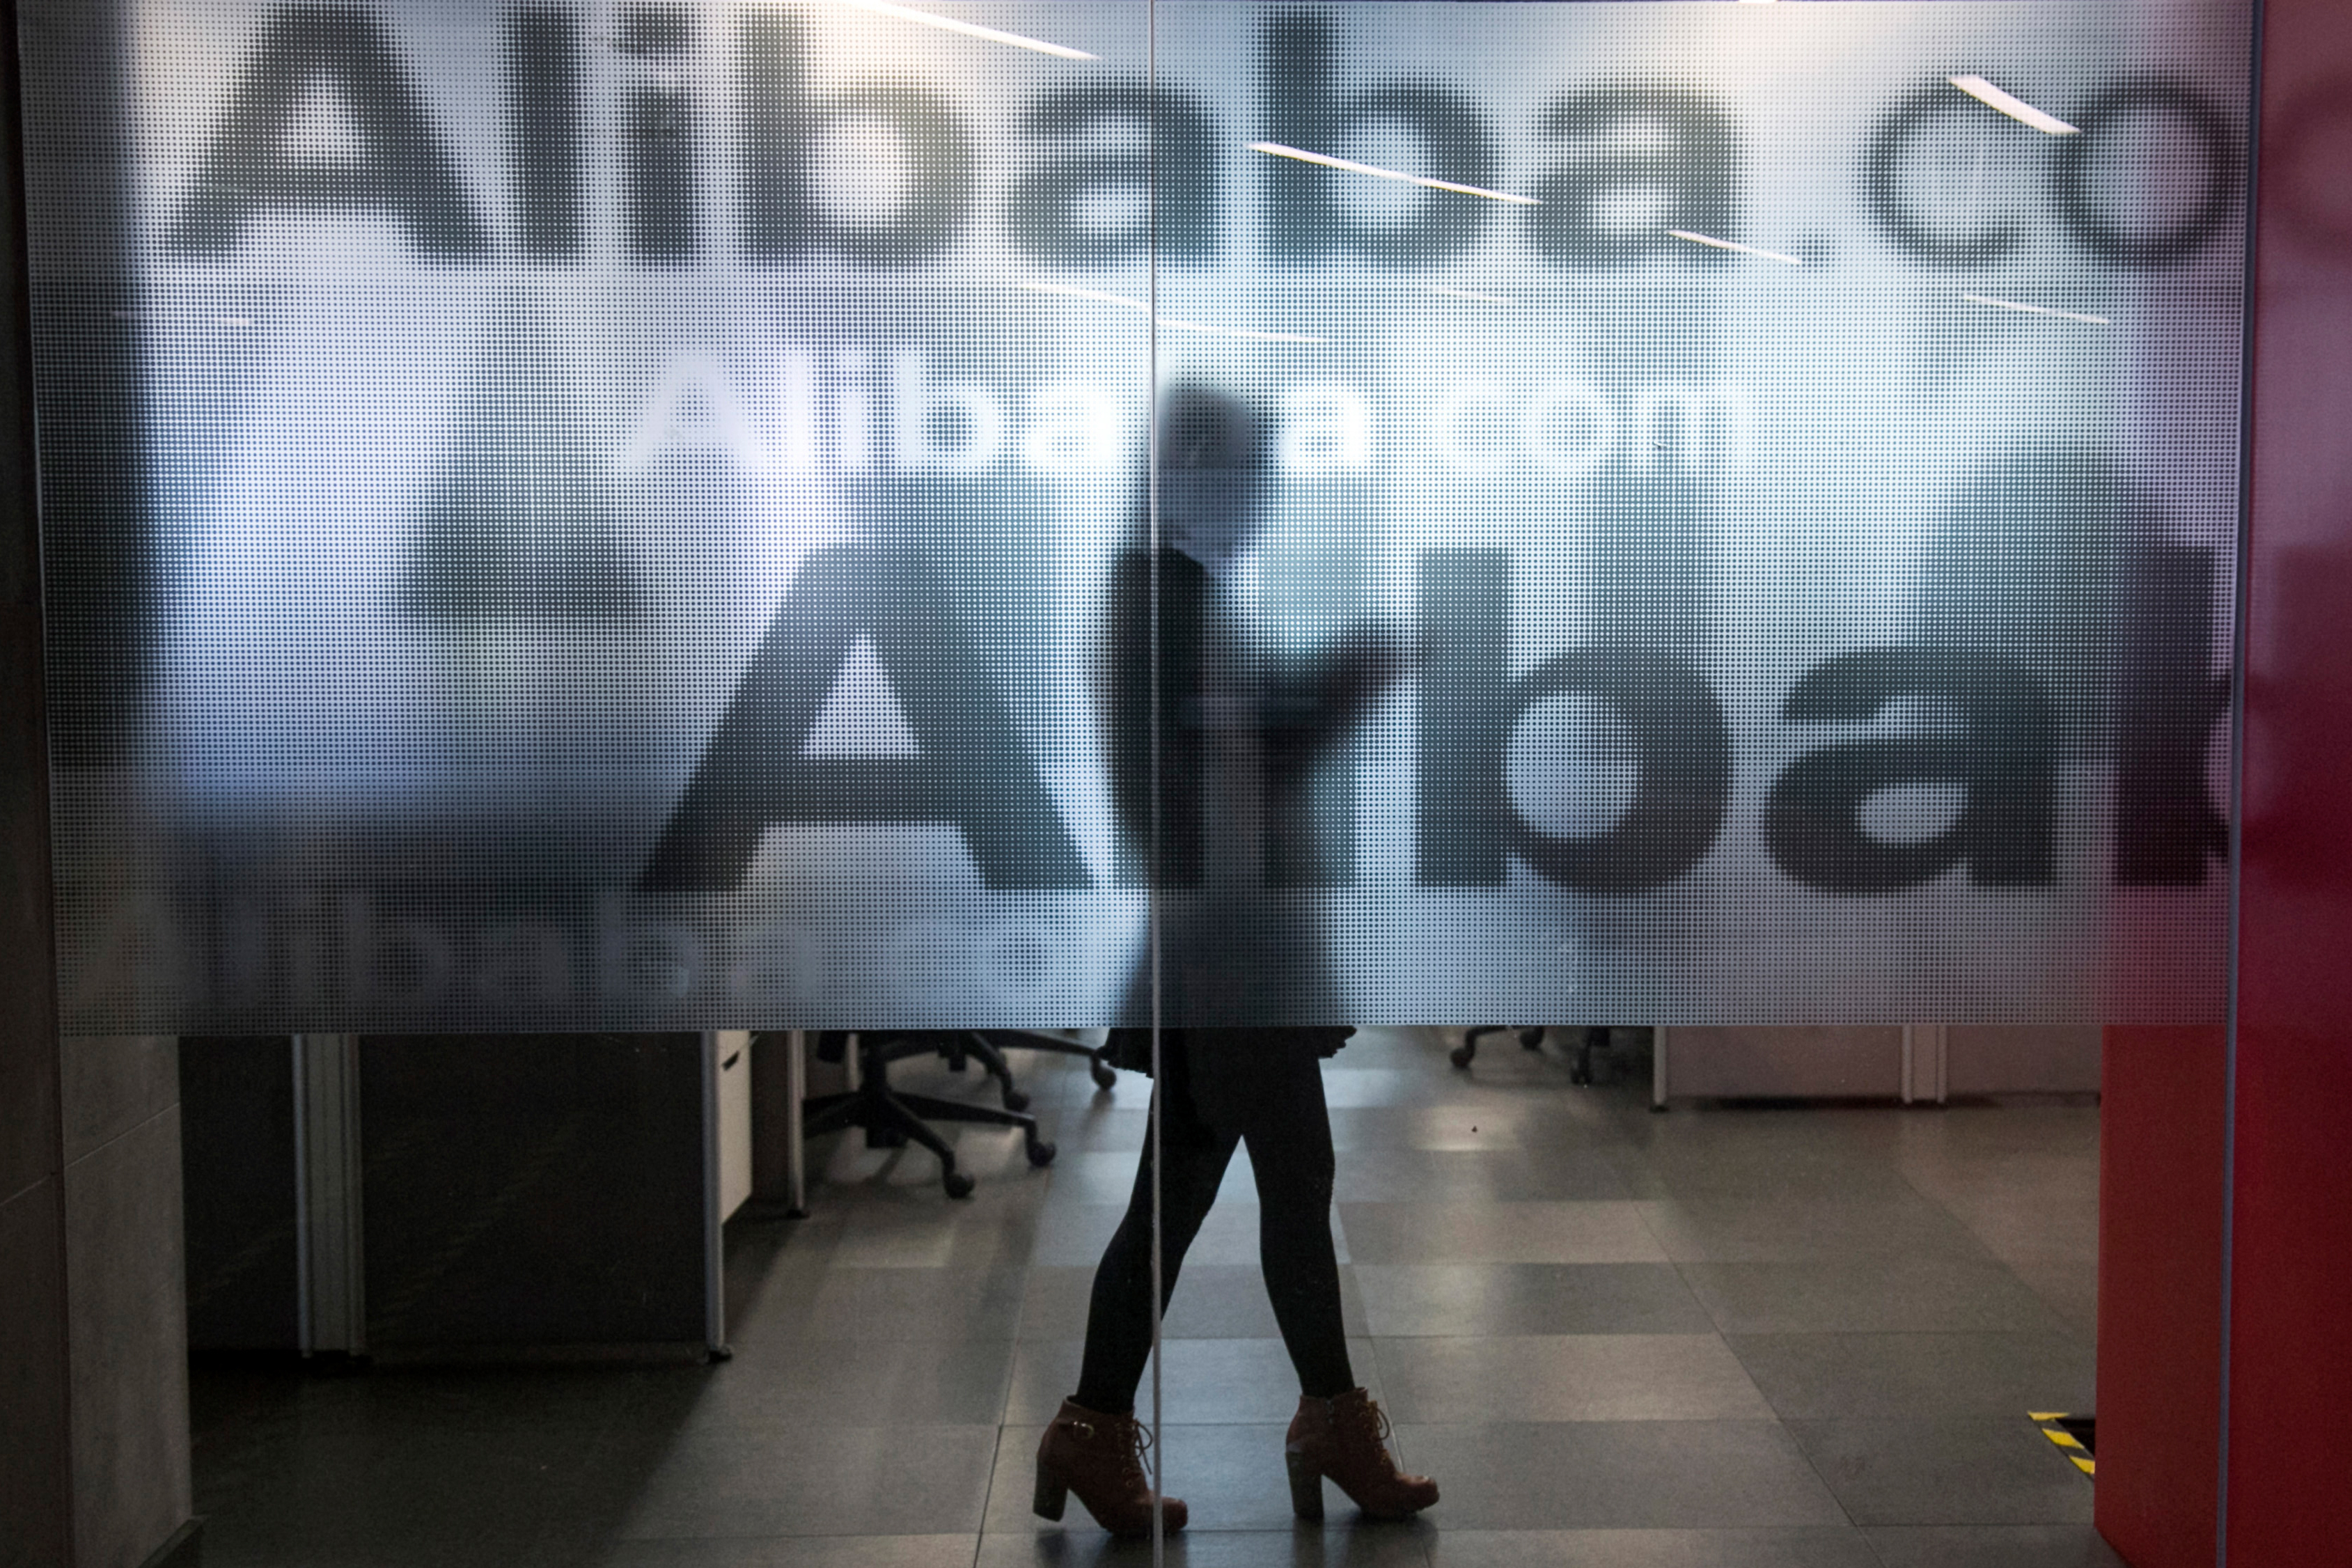 No, Alibaba Is Not the Next Facebook (and 4 Other Myths About This Mega-IPO Debunked)